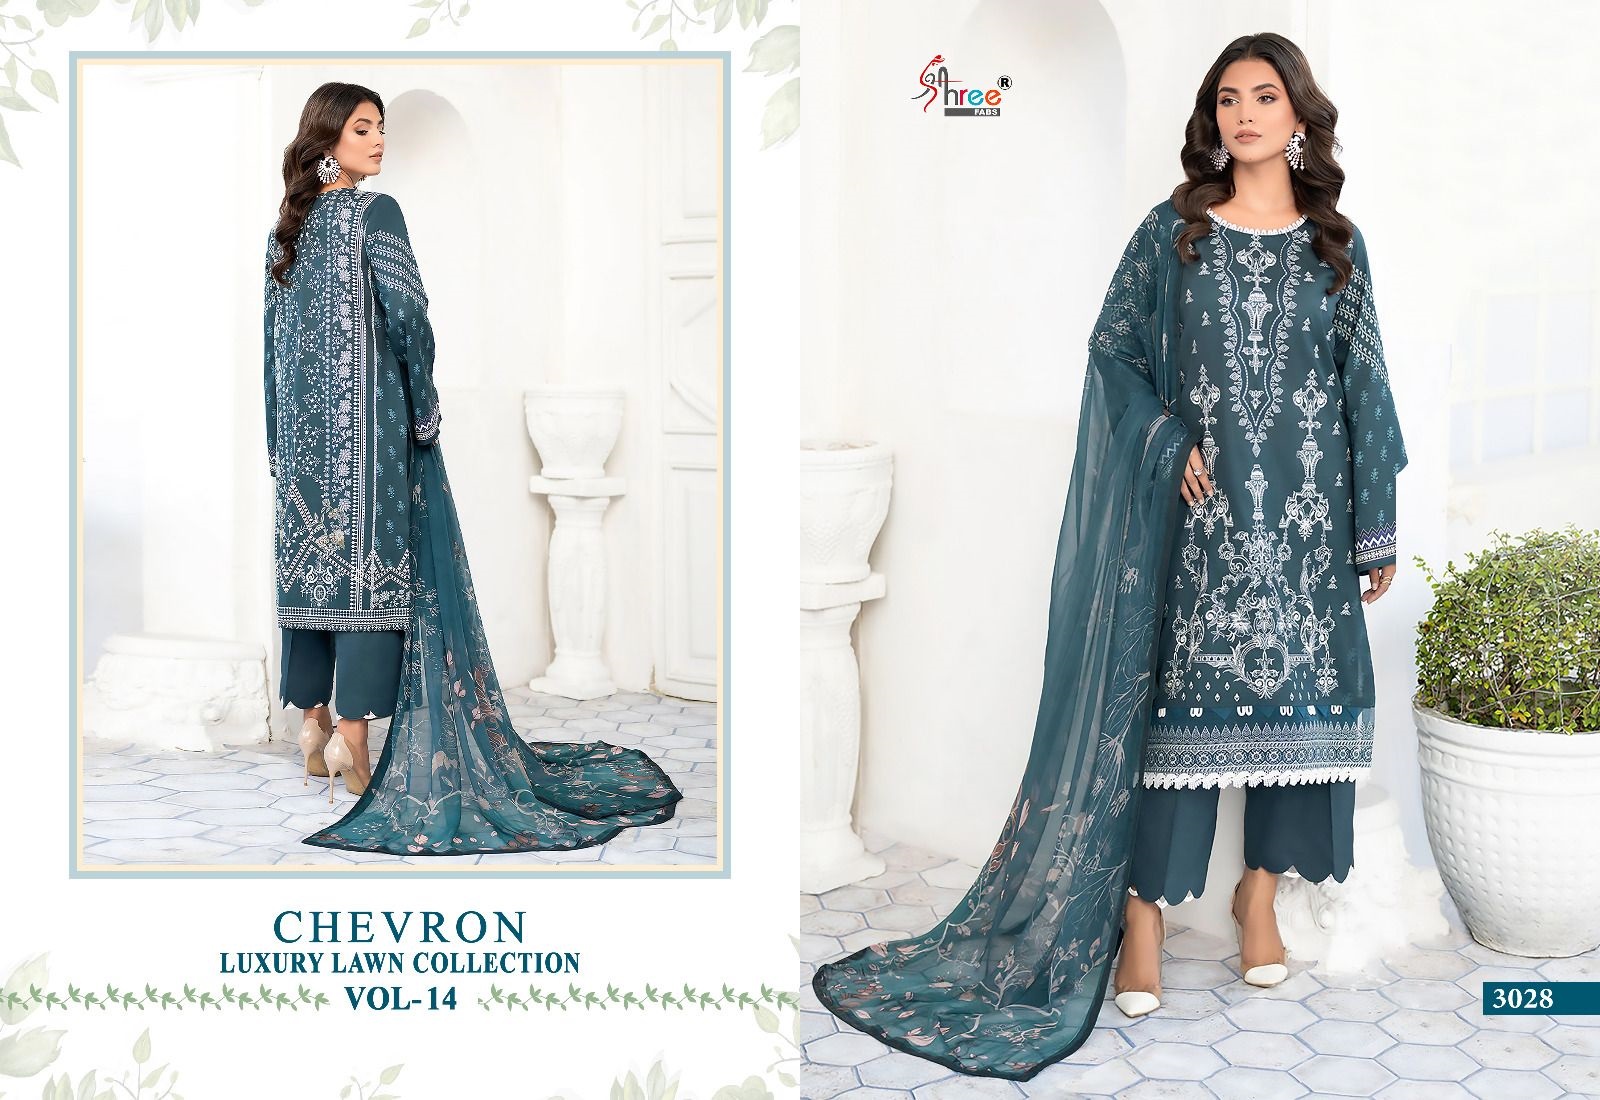 Shree Chevron Luxury Lawn Collection Vol 14 collection 7